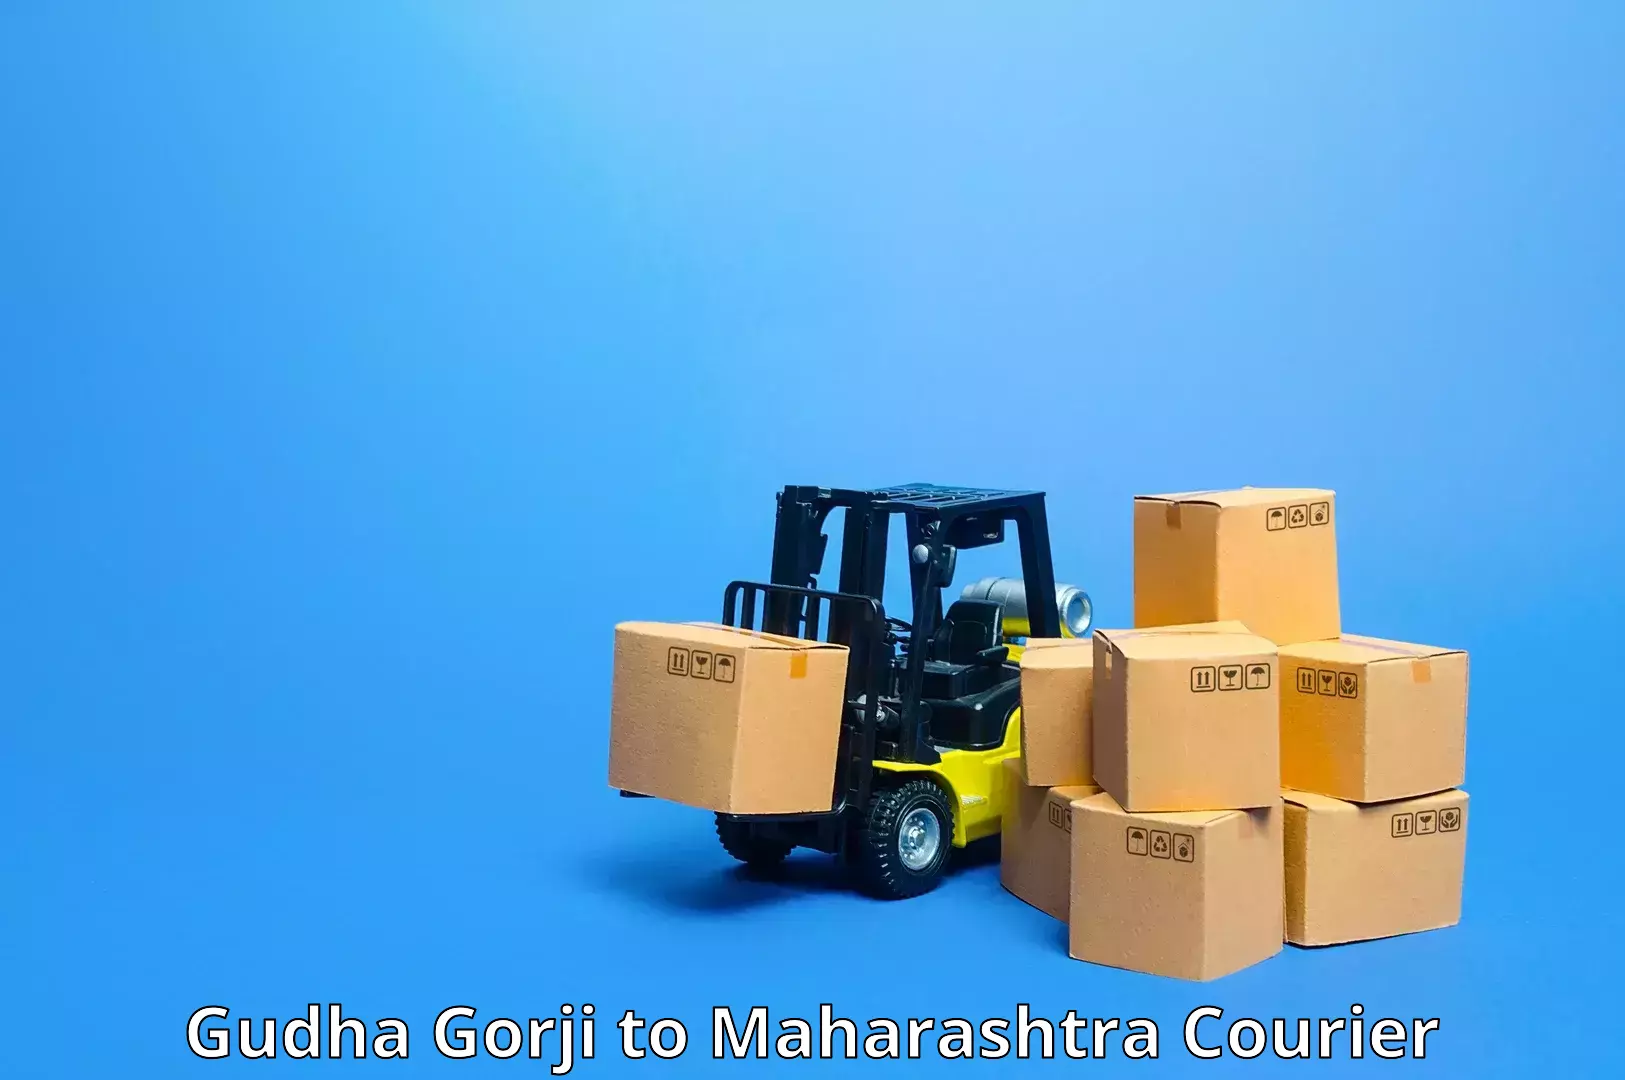 Modern courier technology in Gudha Gorji to Khed